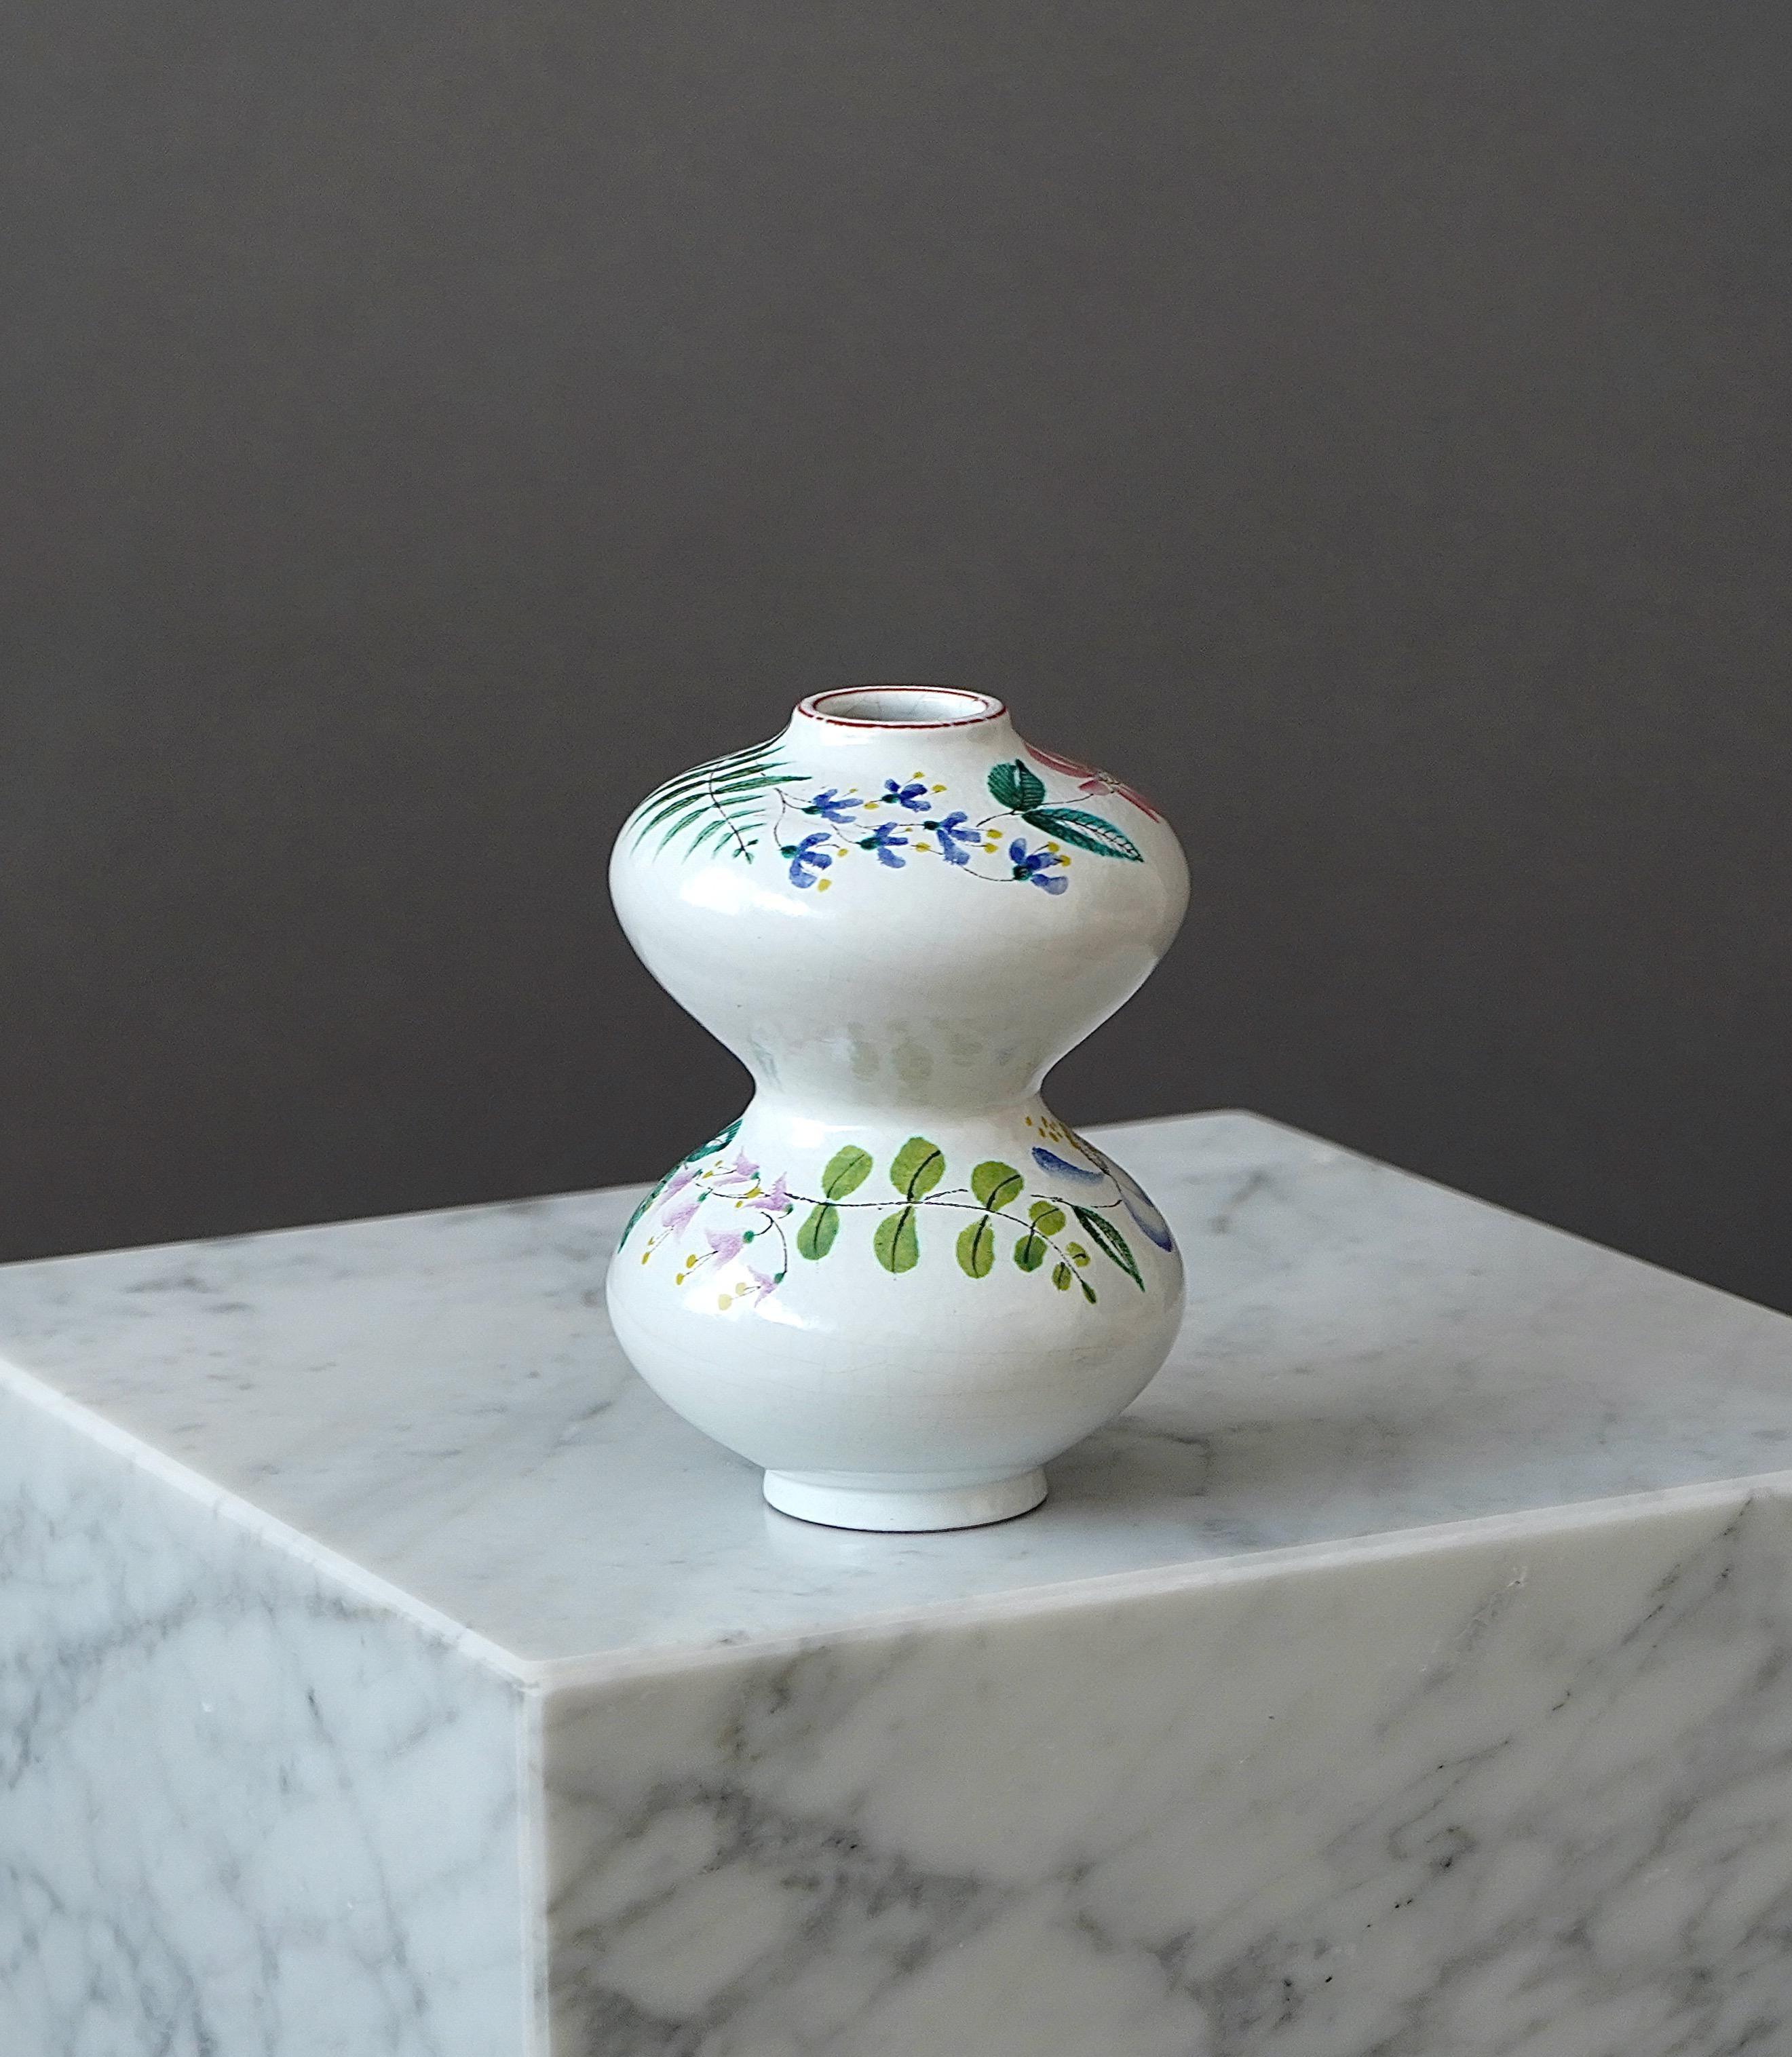 A beautiful faience vase with amazing floral decor.
Designed by Stig Lindberg in Gustavsberg Studio, Sweden, 1950s.

Excellent condition.
Signed with the Gustavsberg studio hand.

Stig Lindberg and Gustavsberg’s artistic leader Wilhelm Kåge designed